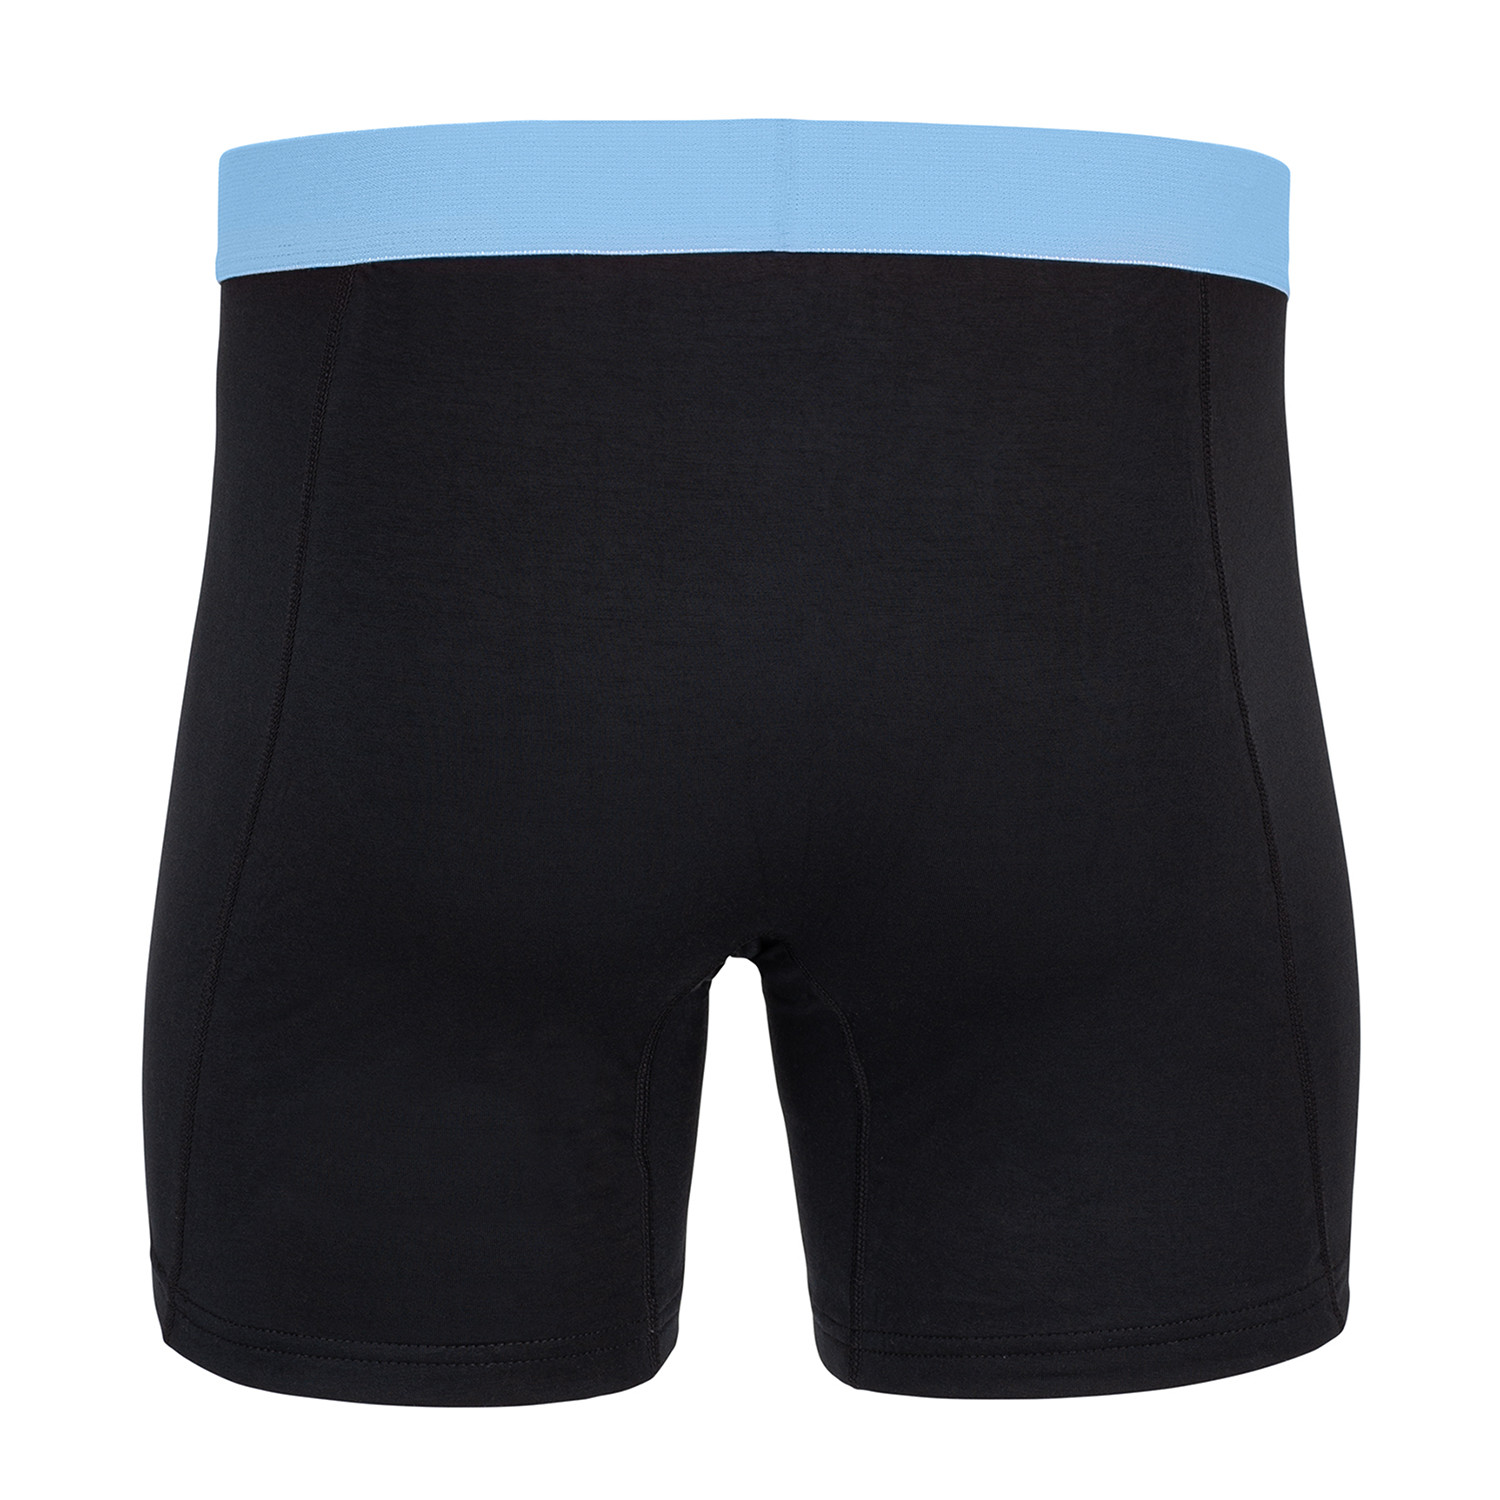 Sweat Proof Boxer Brief + Fly // Black + Blue (S) - Ejis - Touch